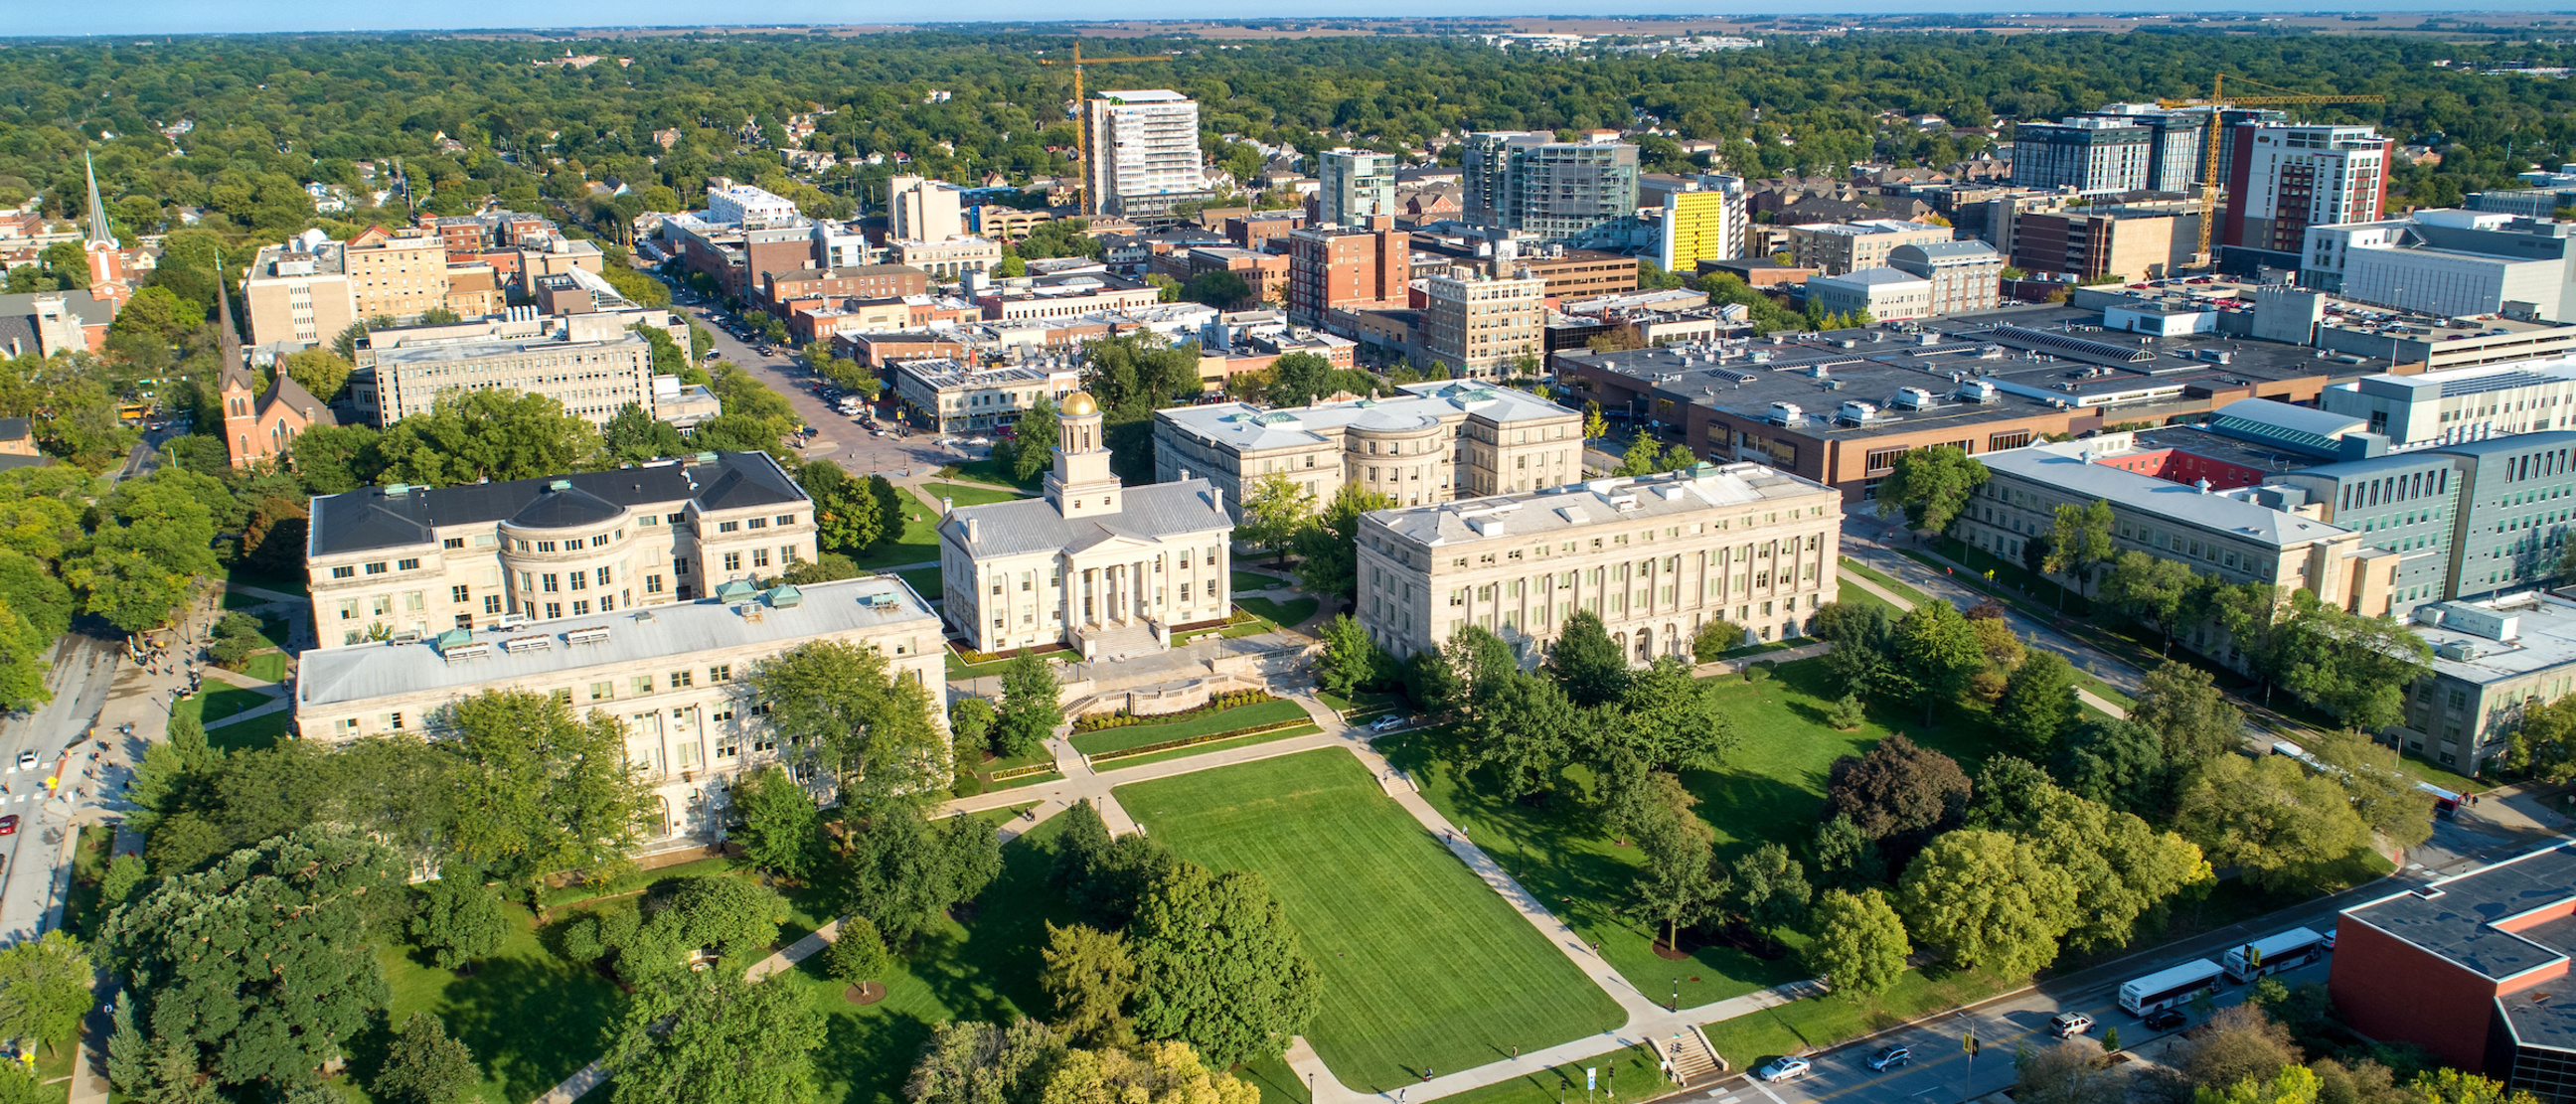 Social Work Admissions The University of Iowa